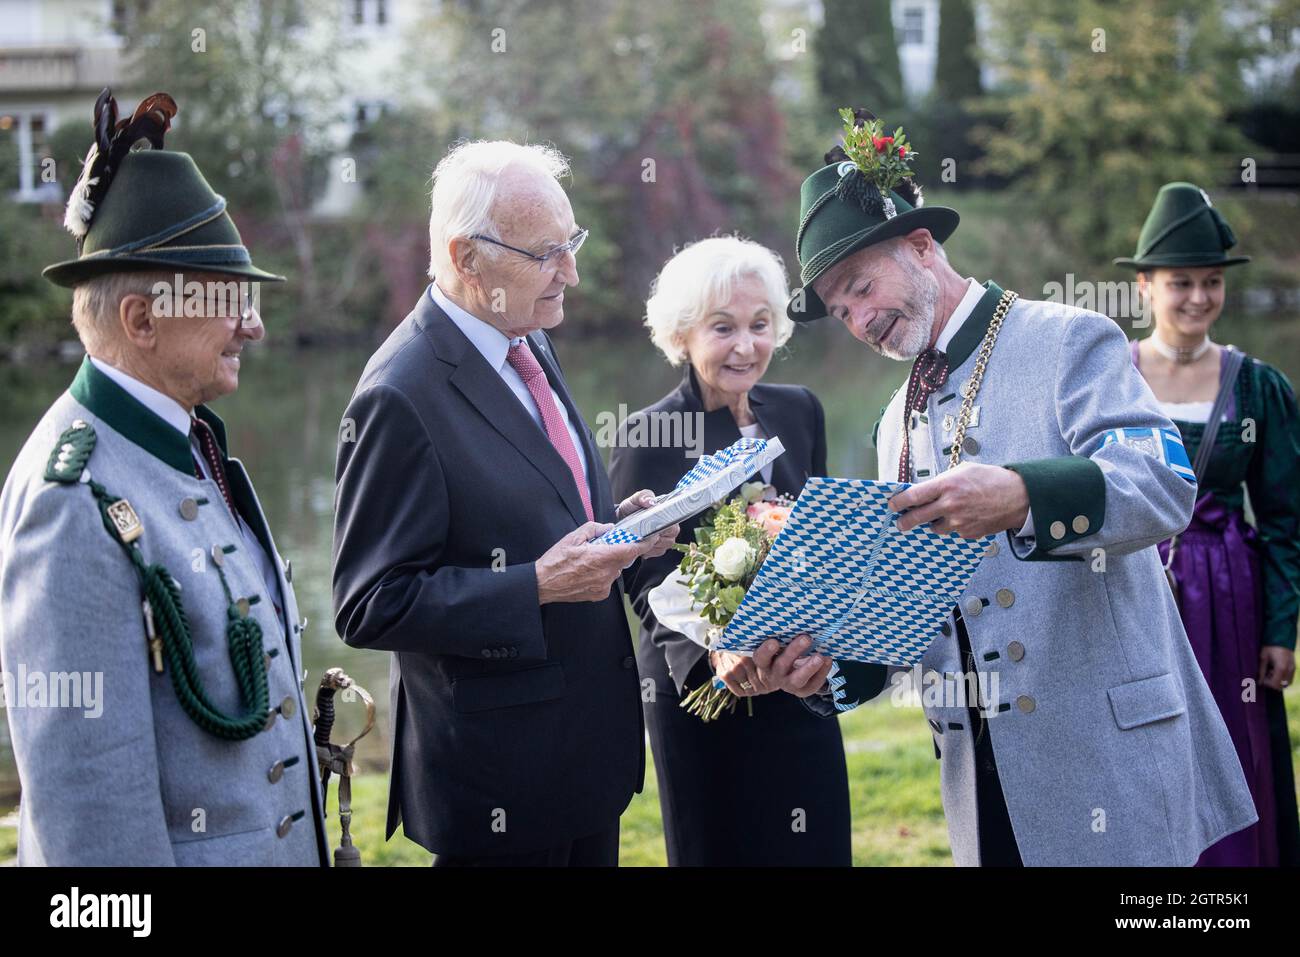 Wolfratshausen, Germany. 02nd Oct, 2021. Klaus Heilinglechner, mayor of Wolfratshausen (2nd from right, non-party), presents Edmund Stoiber, former CSU chairman (2nd from left), with a gift during a tribute at the ex-CSU party leader's 80th birthday party. Stoiber's wife Karin stands in the middle. On the left is Ewald Brückl, honorary captain of the Gebirgsschützen Wolfratshausen, on the right Lena Hochstraßer, sutler from the Gebirgsschützen Wolfratshausen. Credit: Matthias Balk/dpa/Alamy Live News Stock Photo